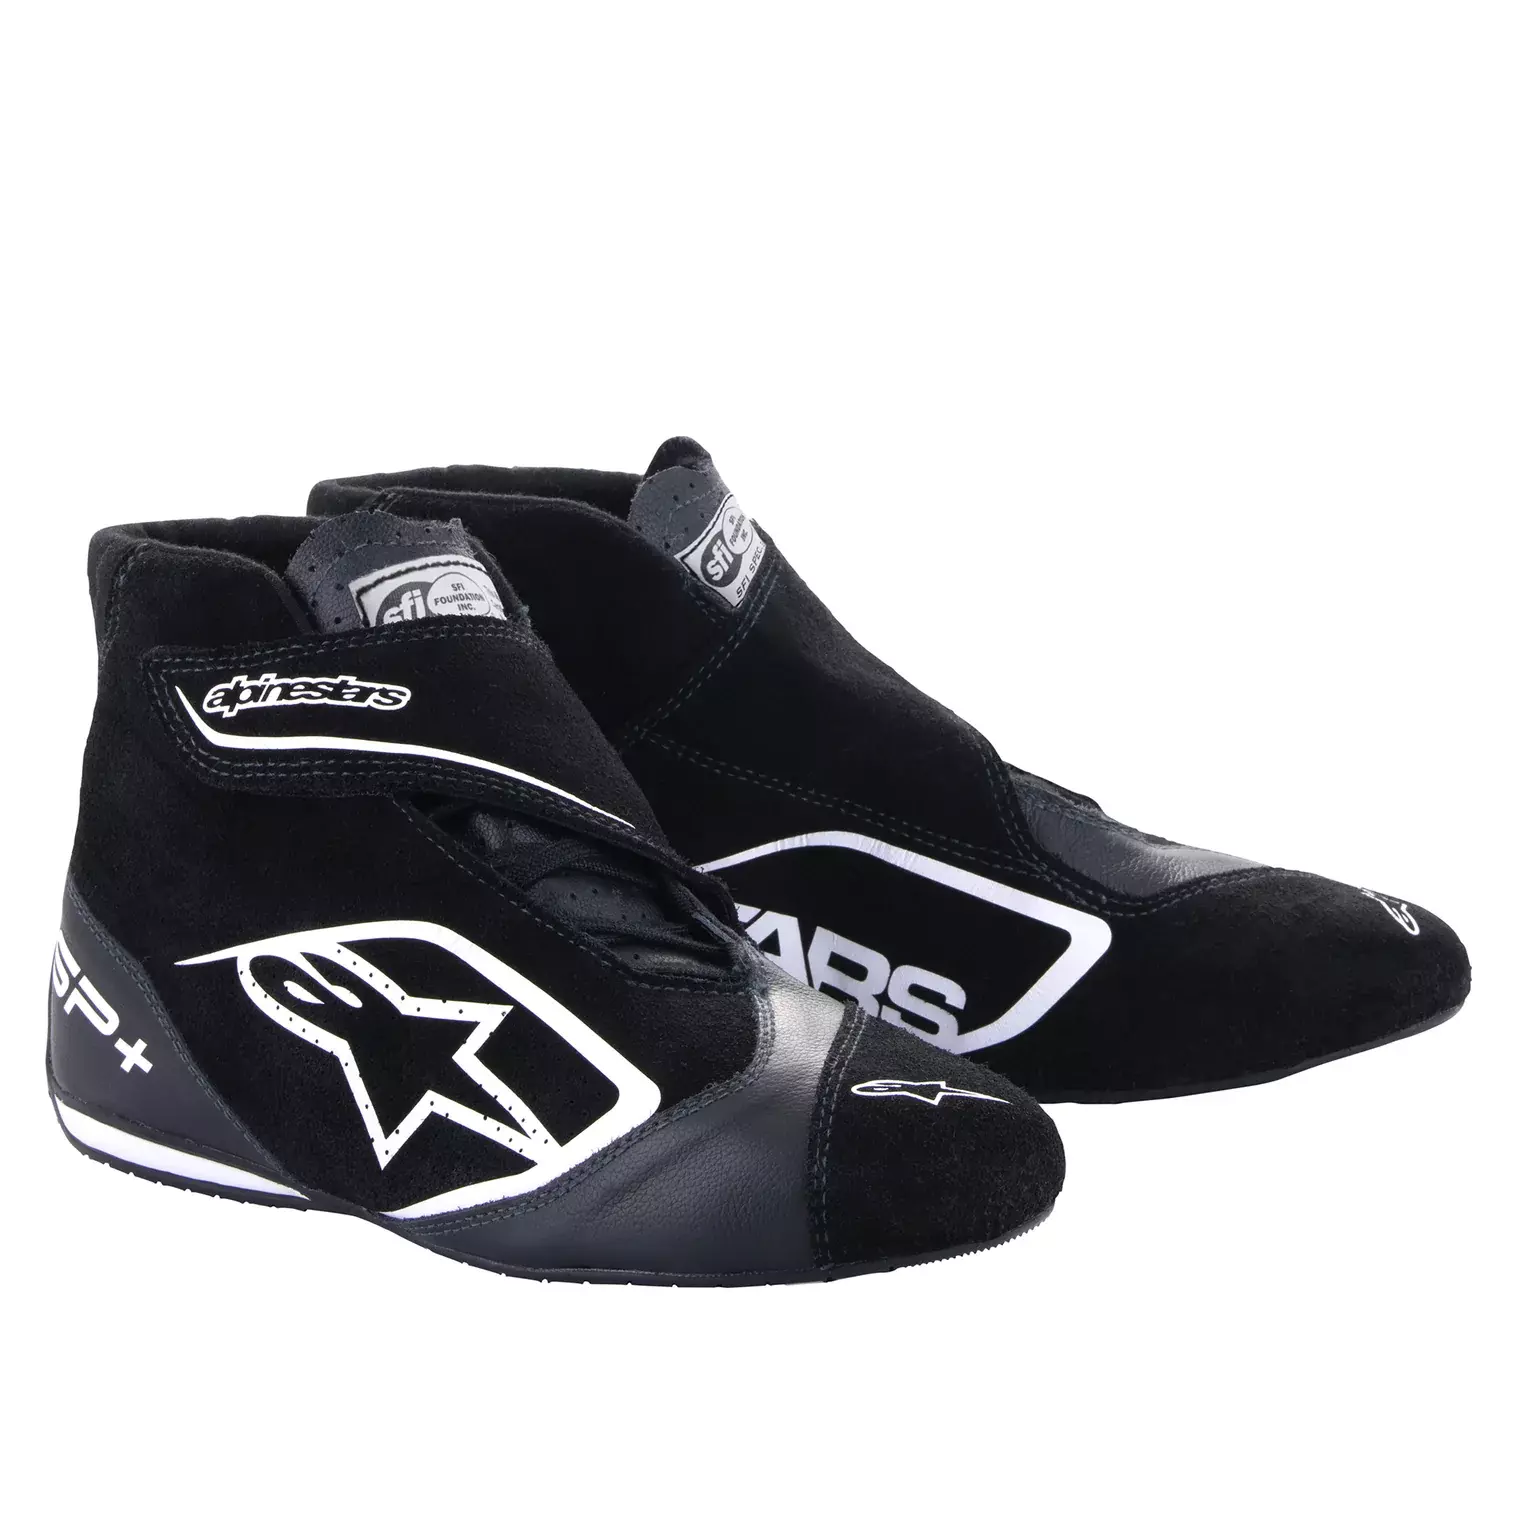 Alpinestars 2710823-12-8 Driving Shoe, SP+, Mid-Top, SFI 3.3, FIA Approved, Suede Outer, Nomex Inner, Black / White, Size 8, Pair